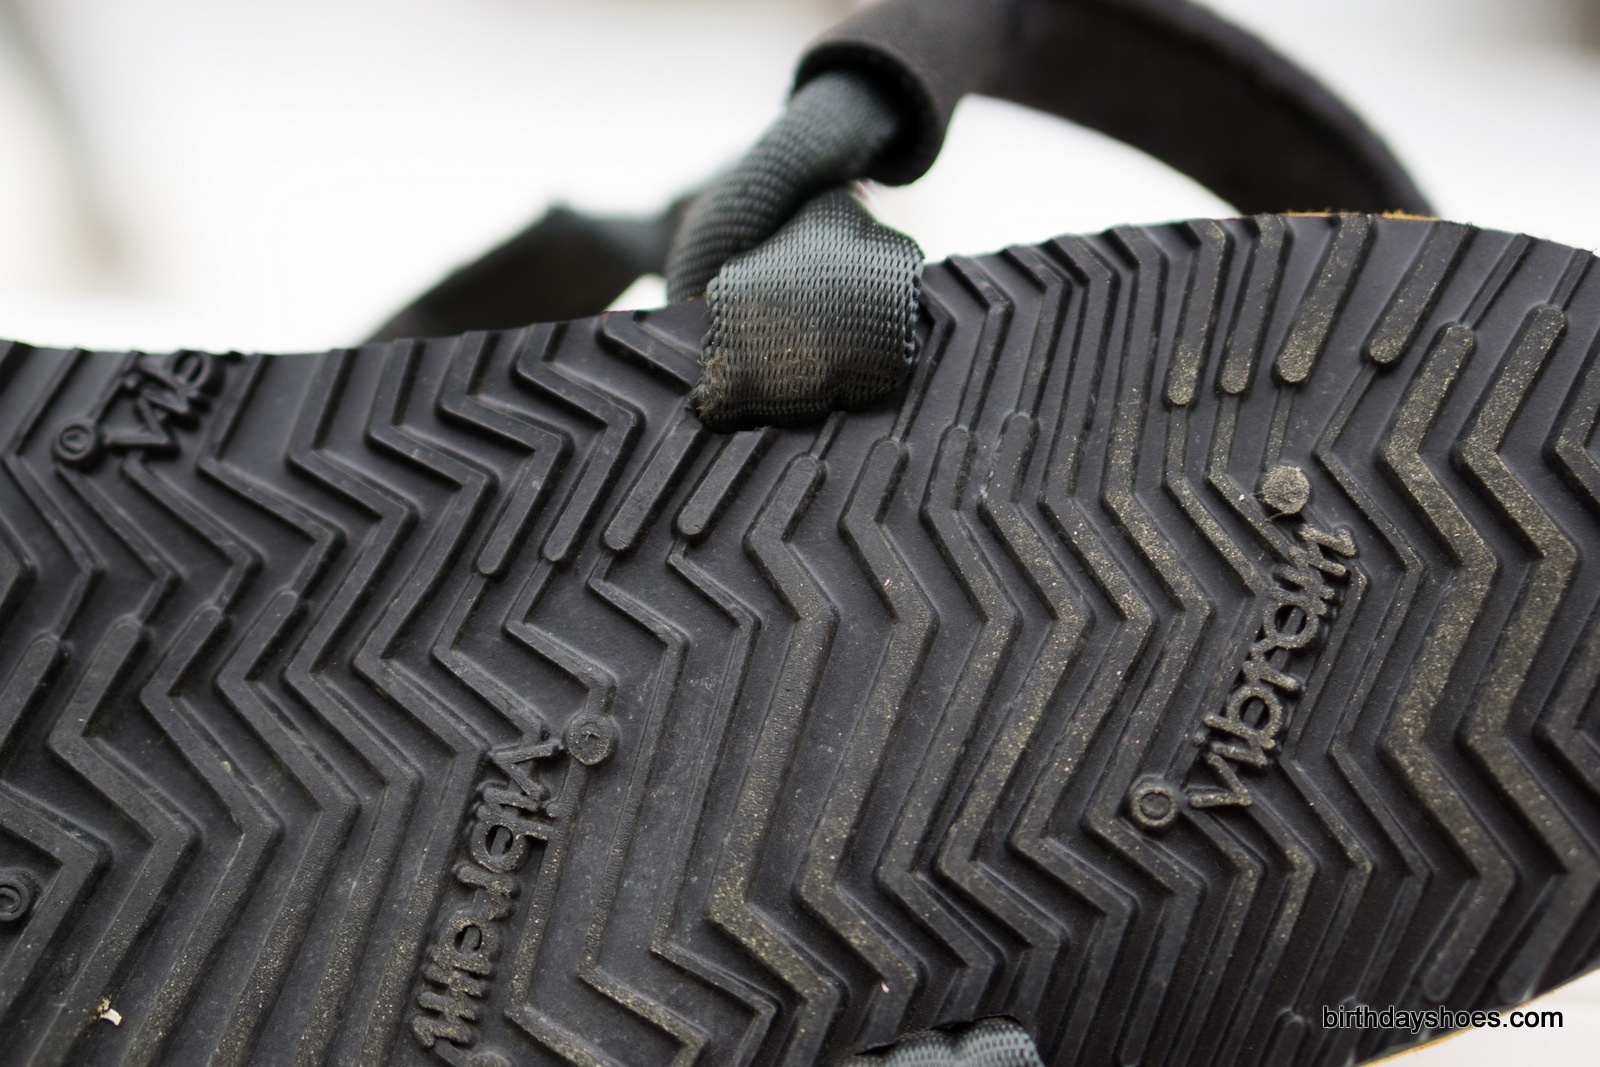 The Definitive Guide to Vibram Rubber Sole Types - BirthdayShoes